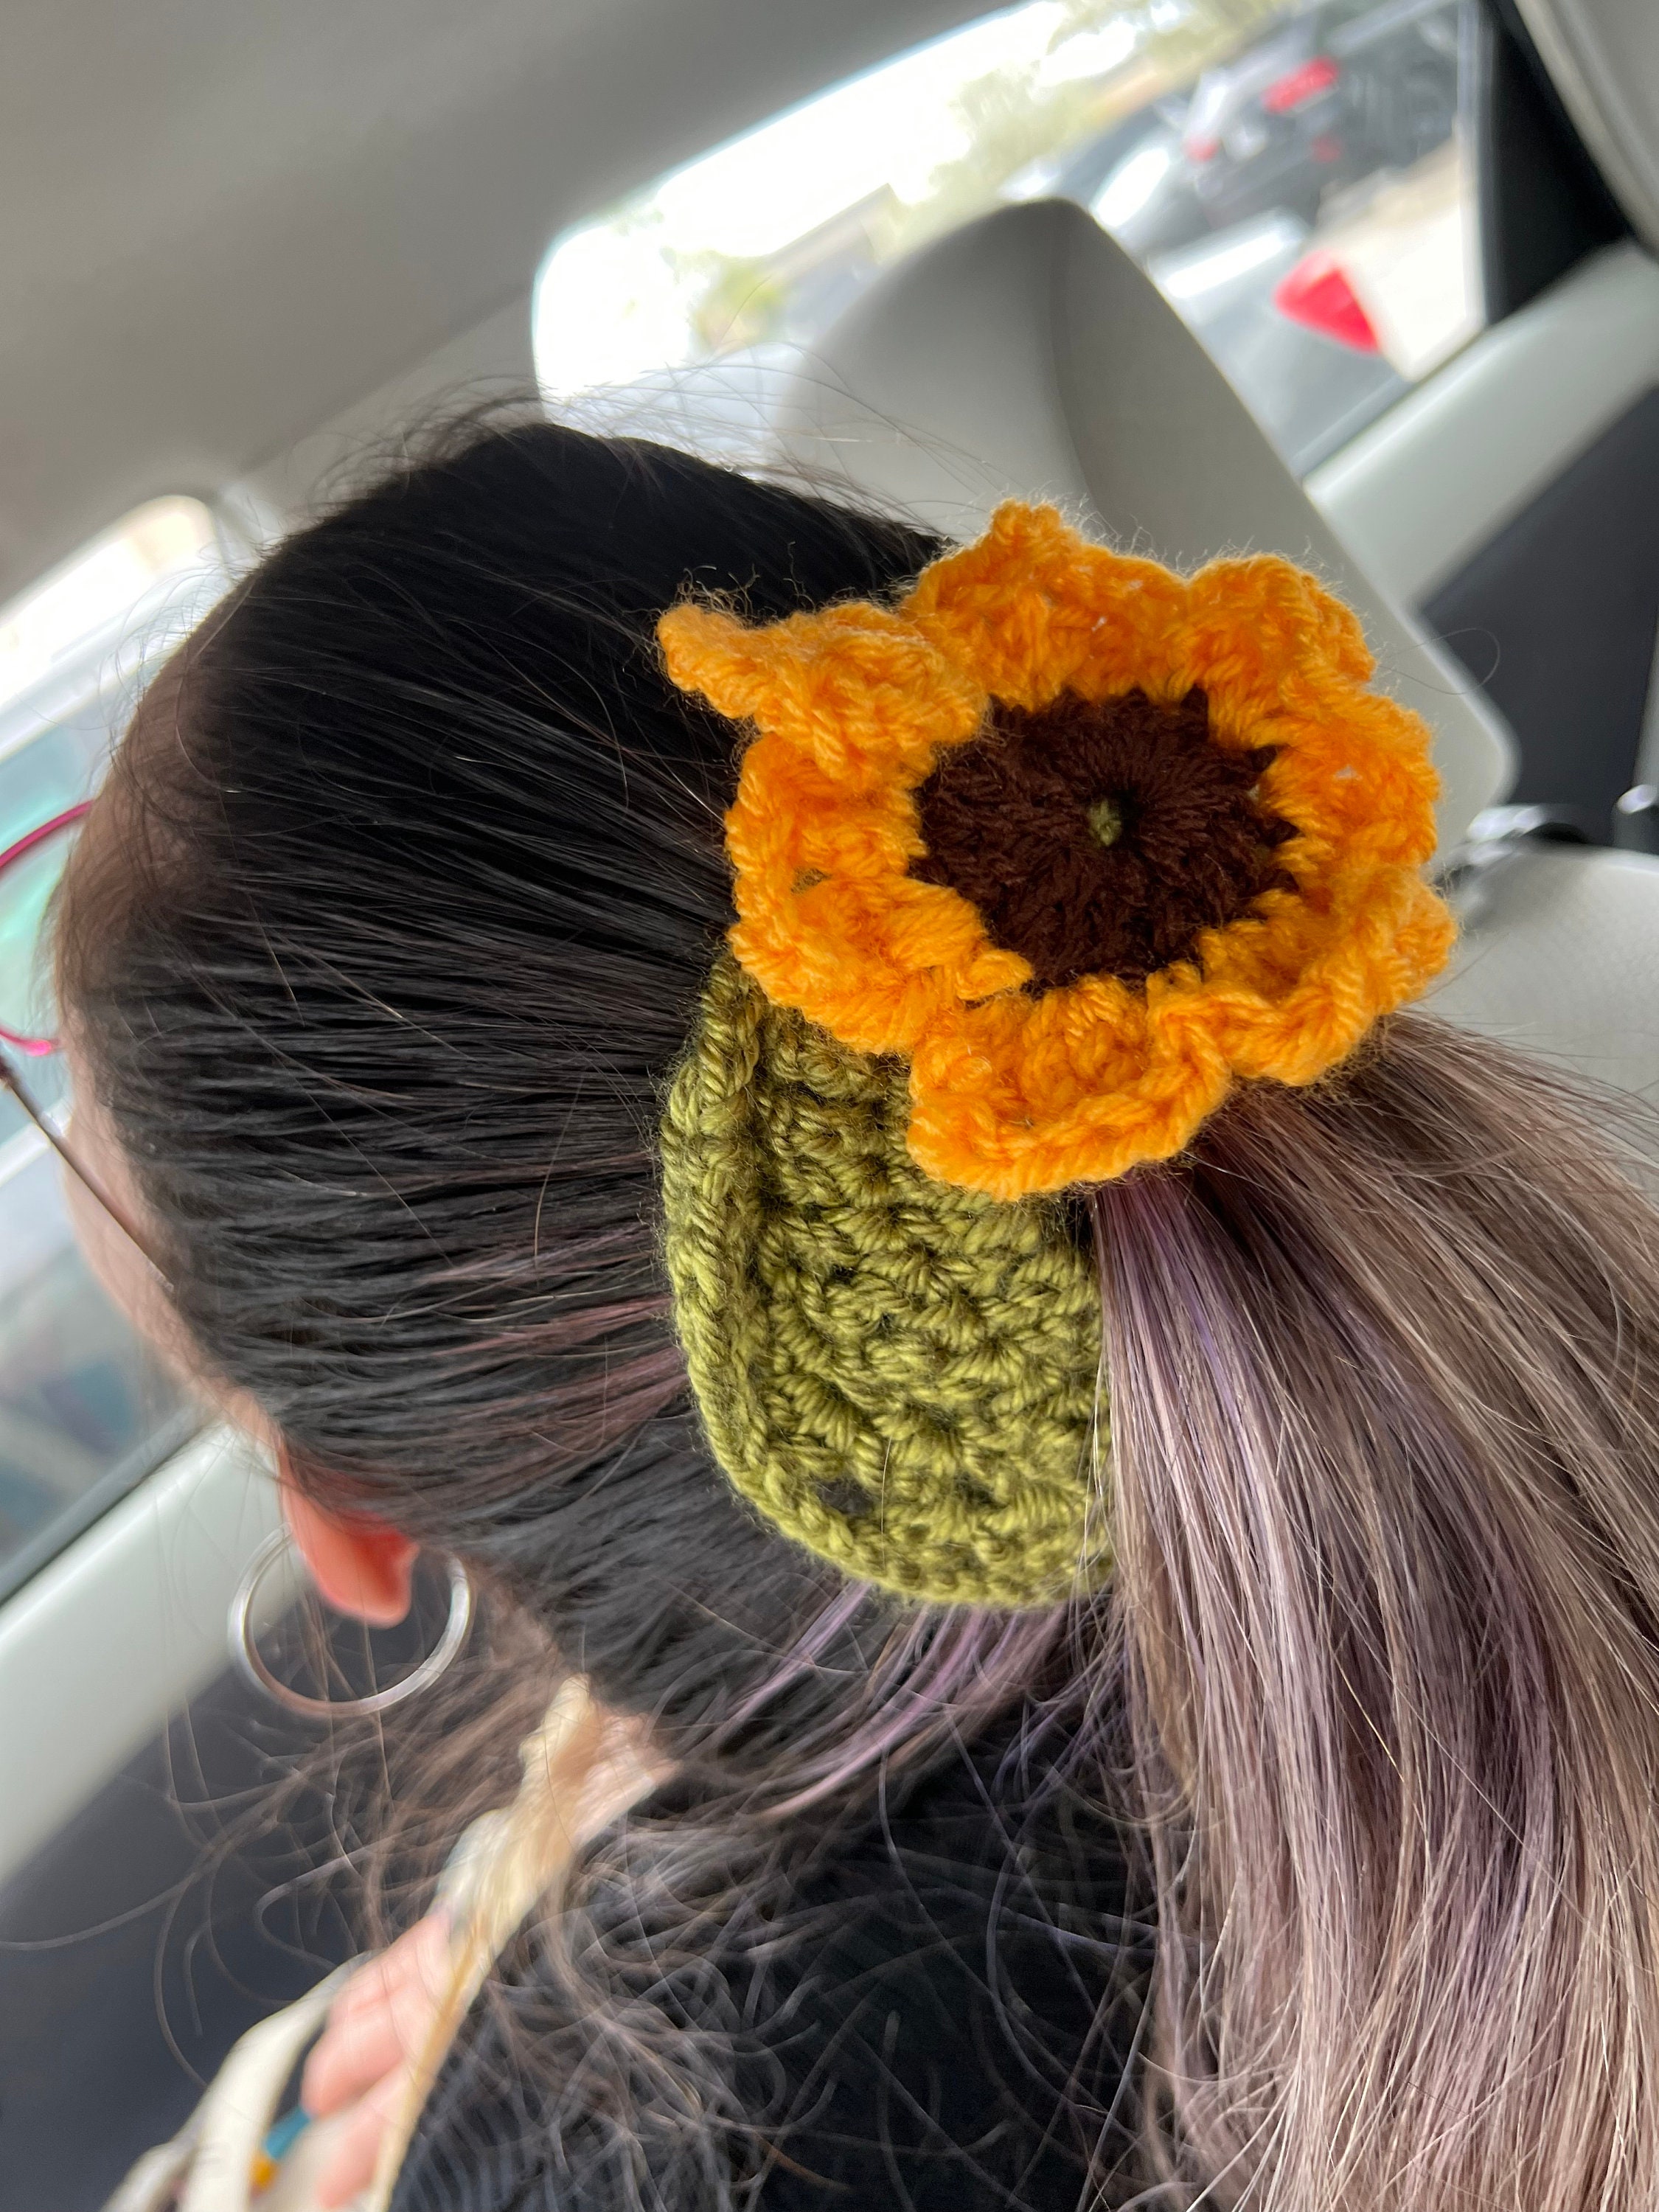 Sunflower hair clips Crochet pattern English. Crochet Sunflower hair tie.  Crochet hair accessory. Crochet pattern and video tutorial